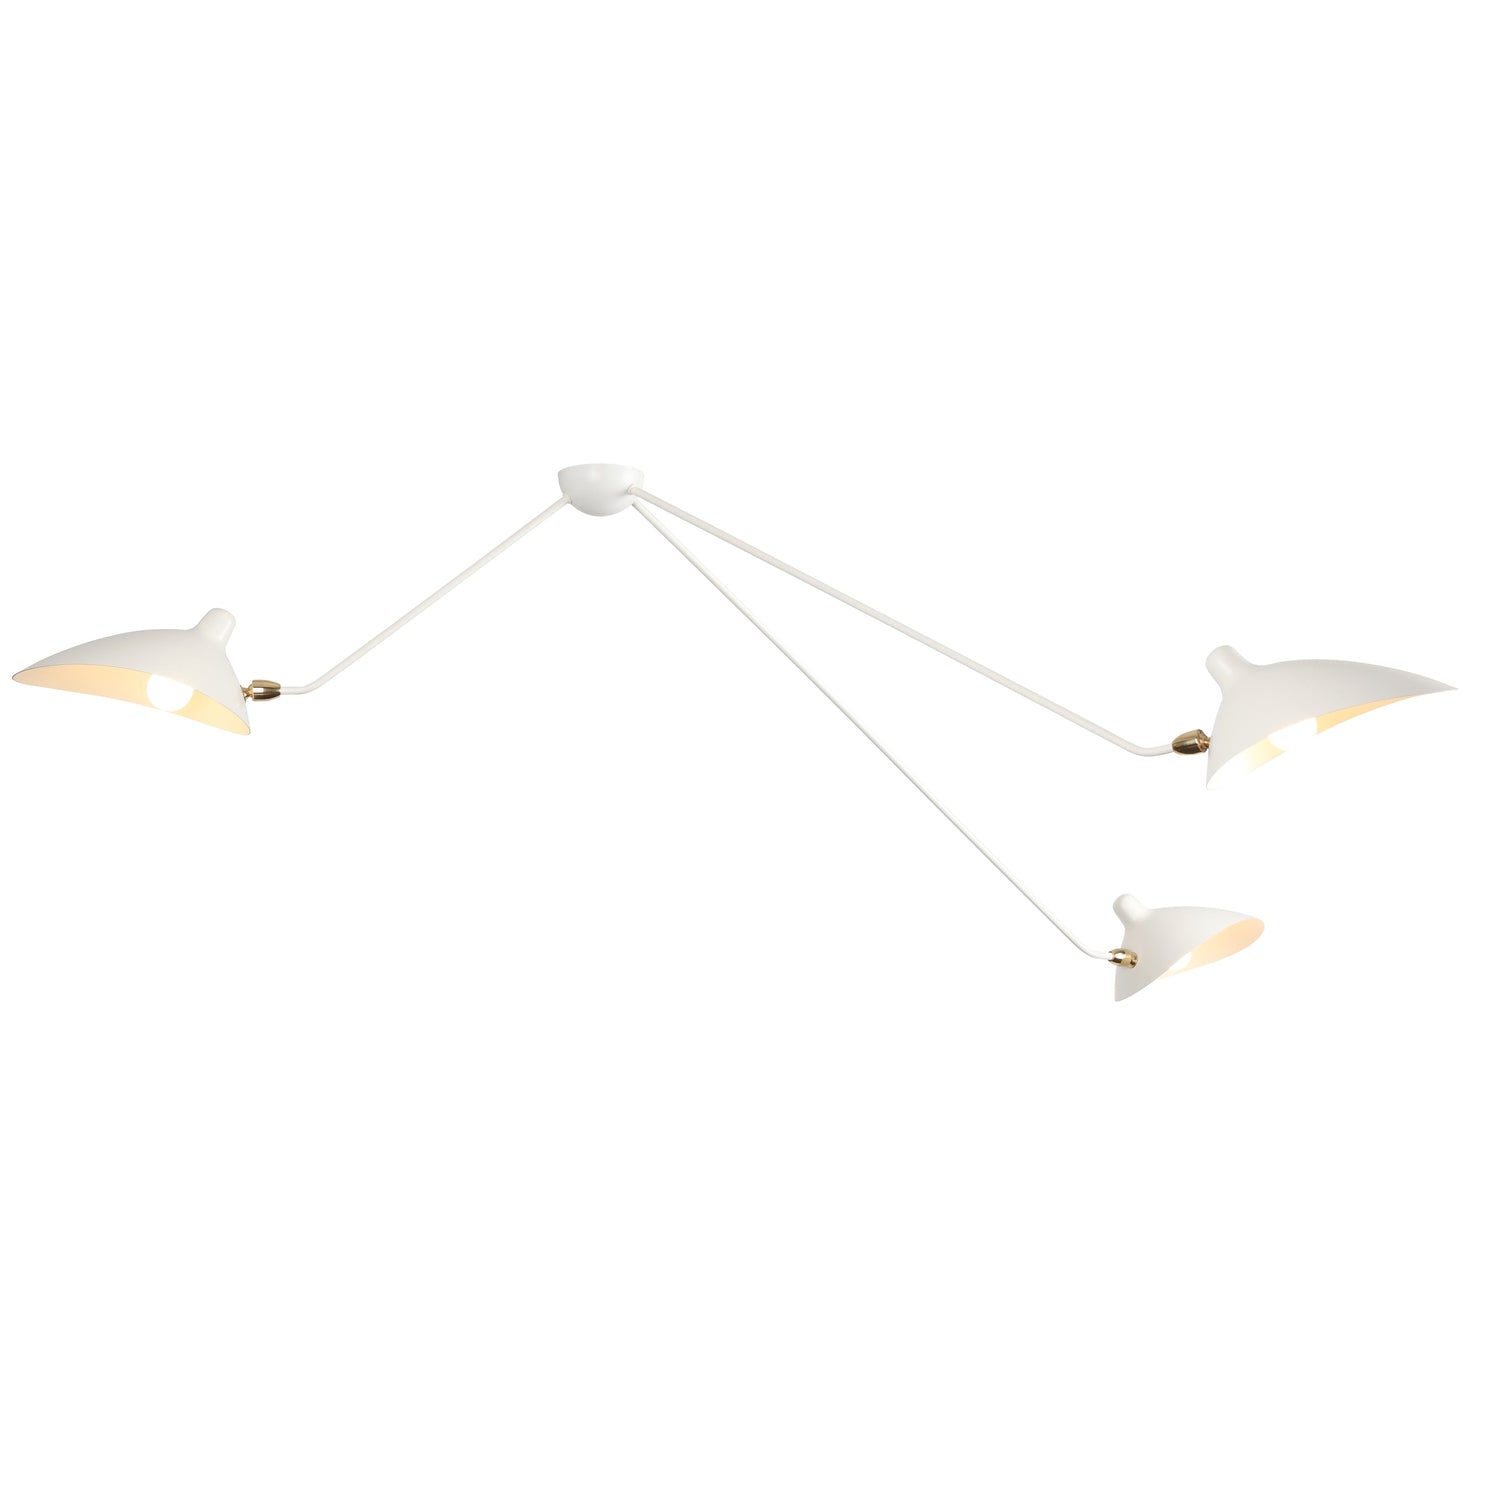 Mid-Century Modern Reproduction Inspired 3 Serge by Lamp Arm Mouille Spider & Ceiling Son MCL-SP3 France –